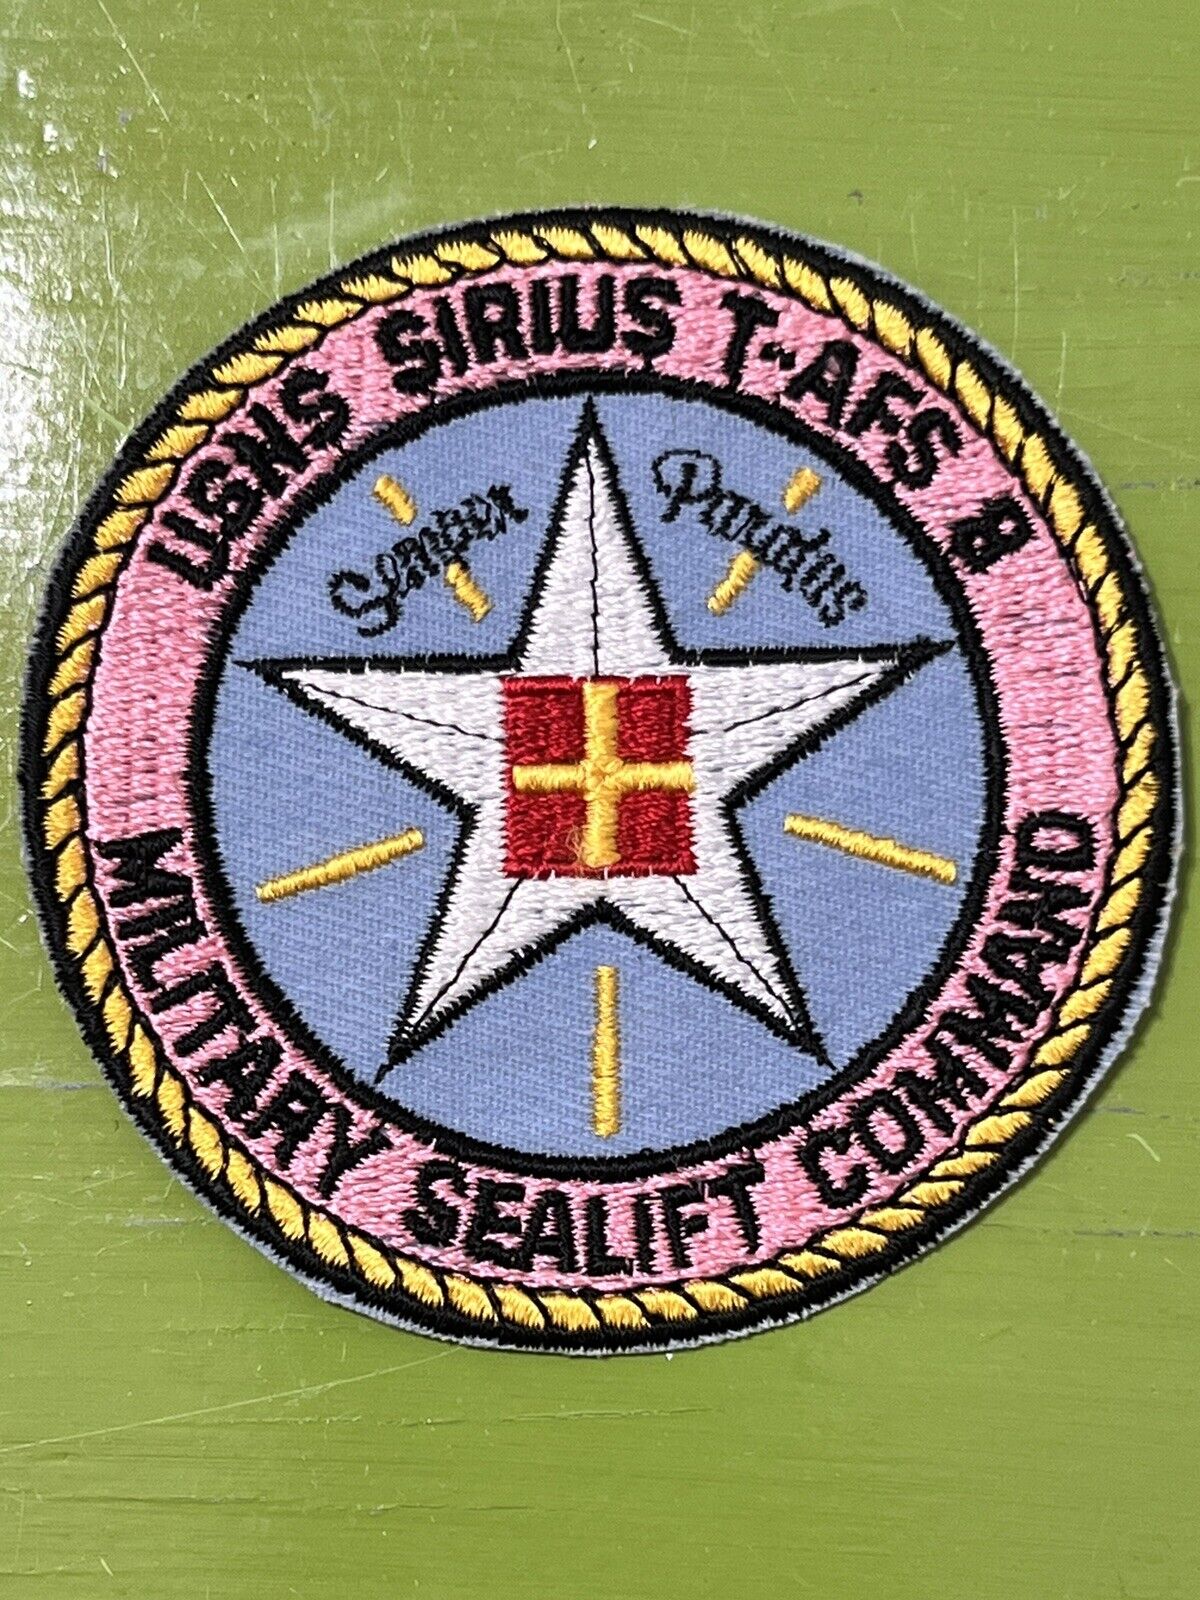 USNS SIRIUS T-AFS 8 MILITARY SEALIFT COMMAND PATCH PINK OUTER